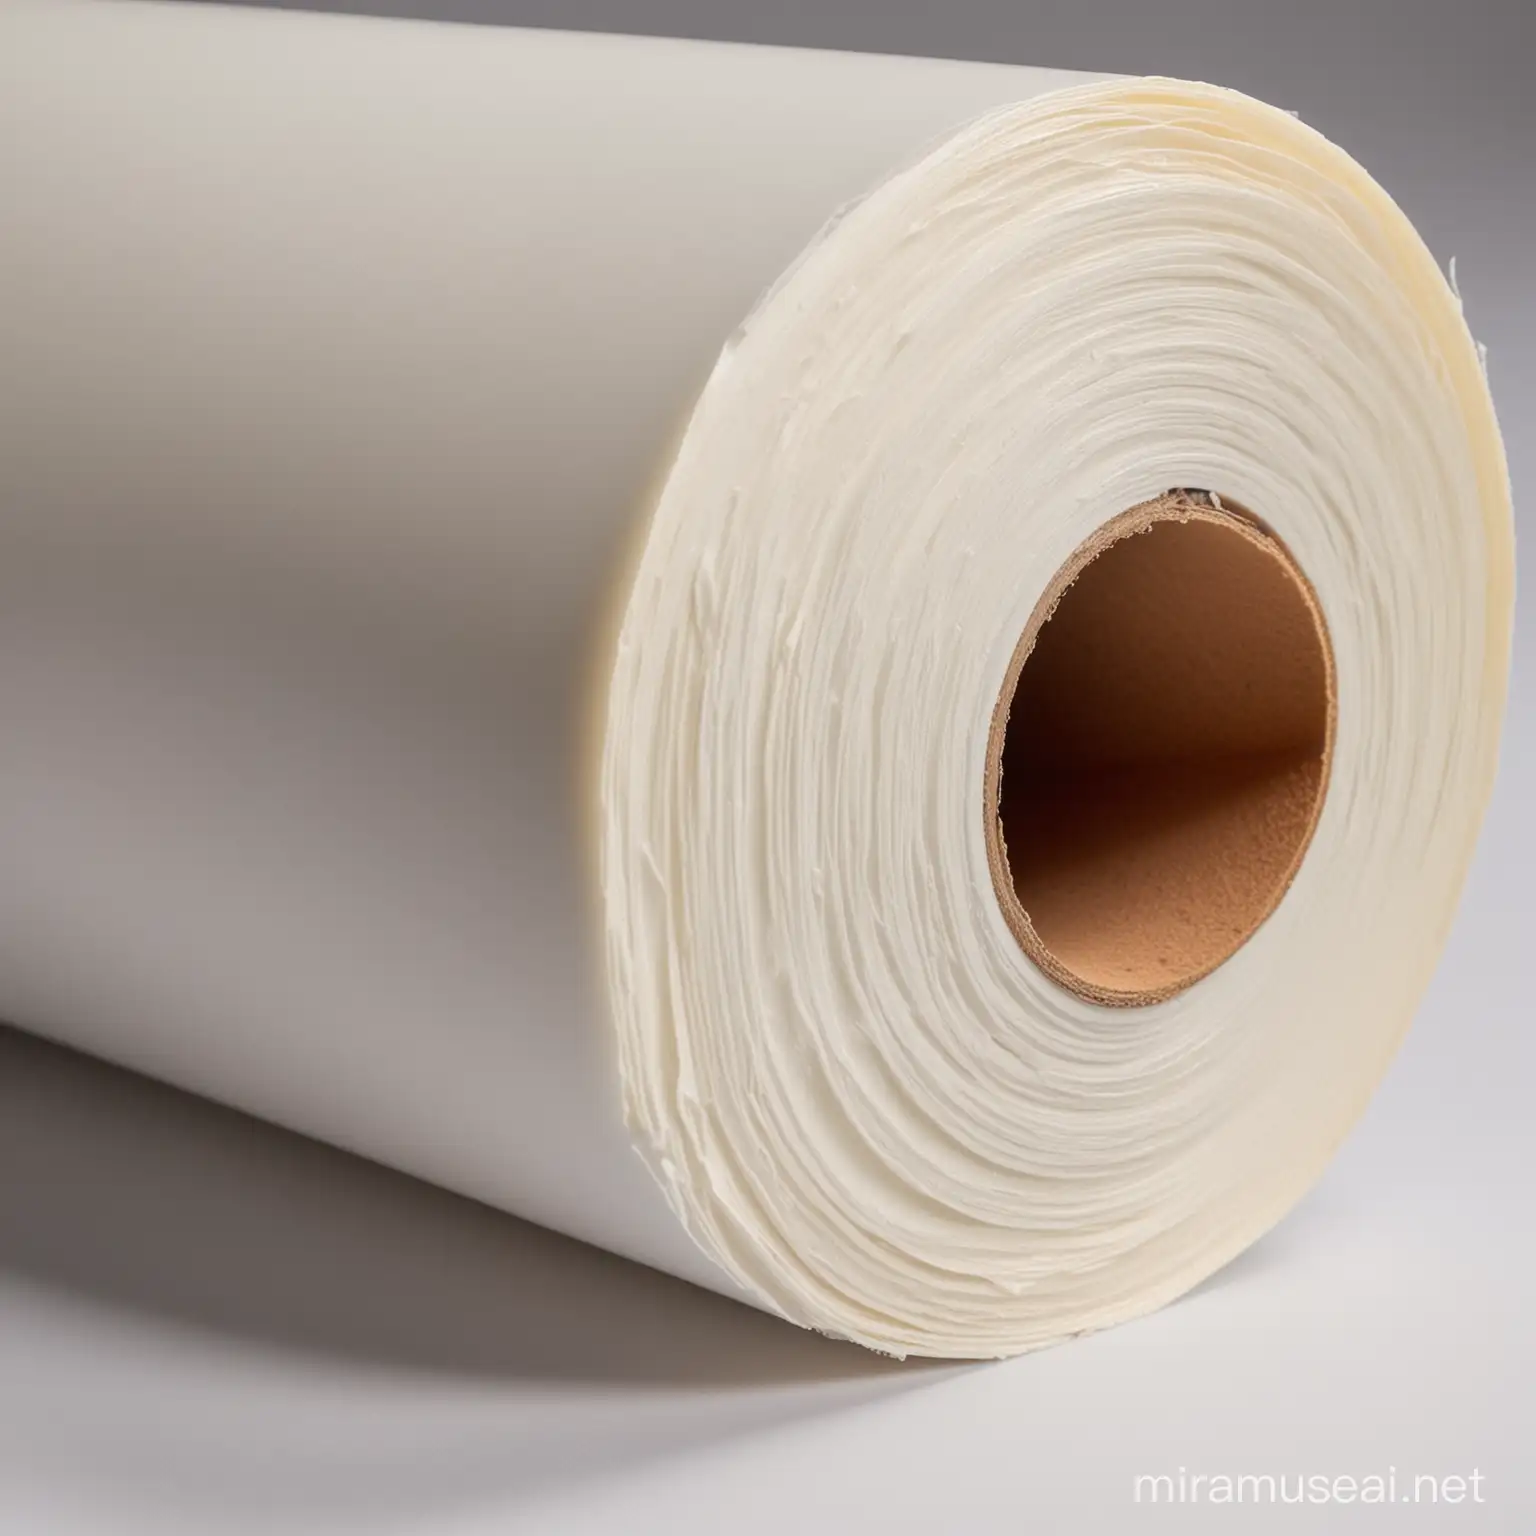 a realistic photo of a roll of pvc that looks about 60 inches wide and has a core on the inside, neatly wound.